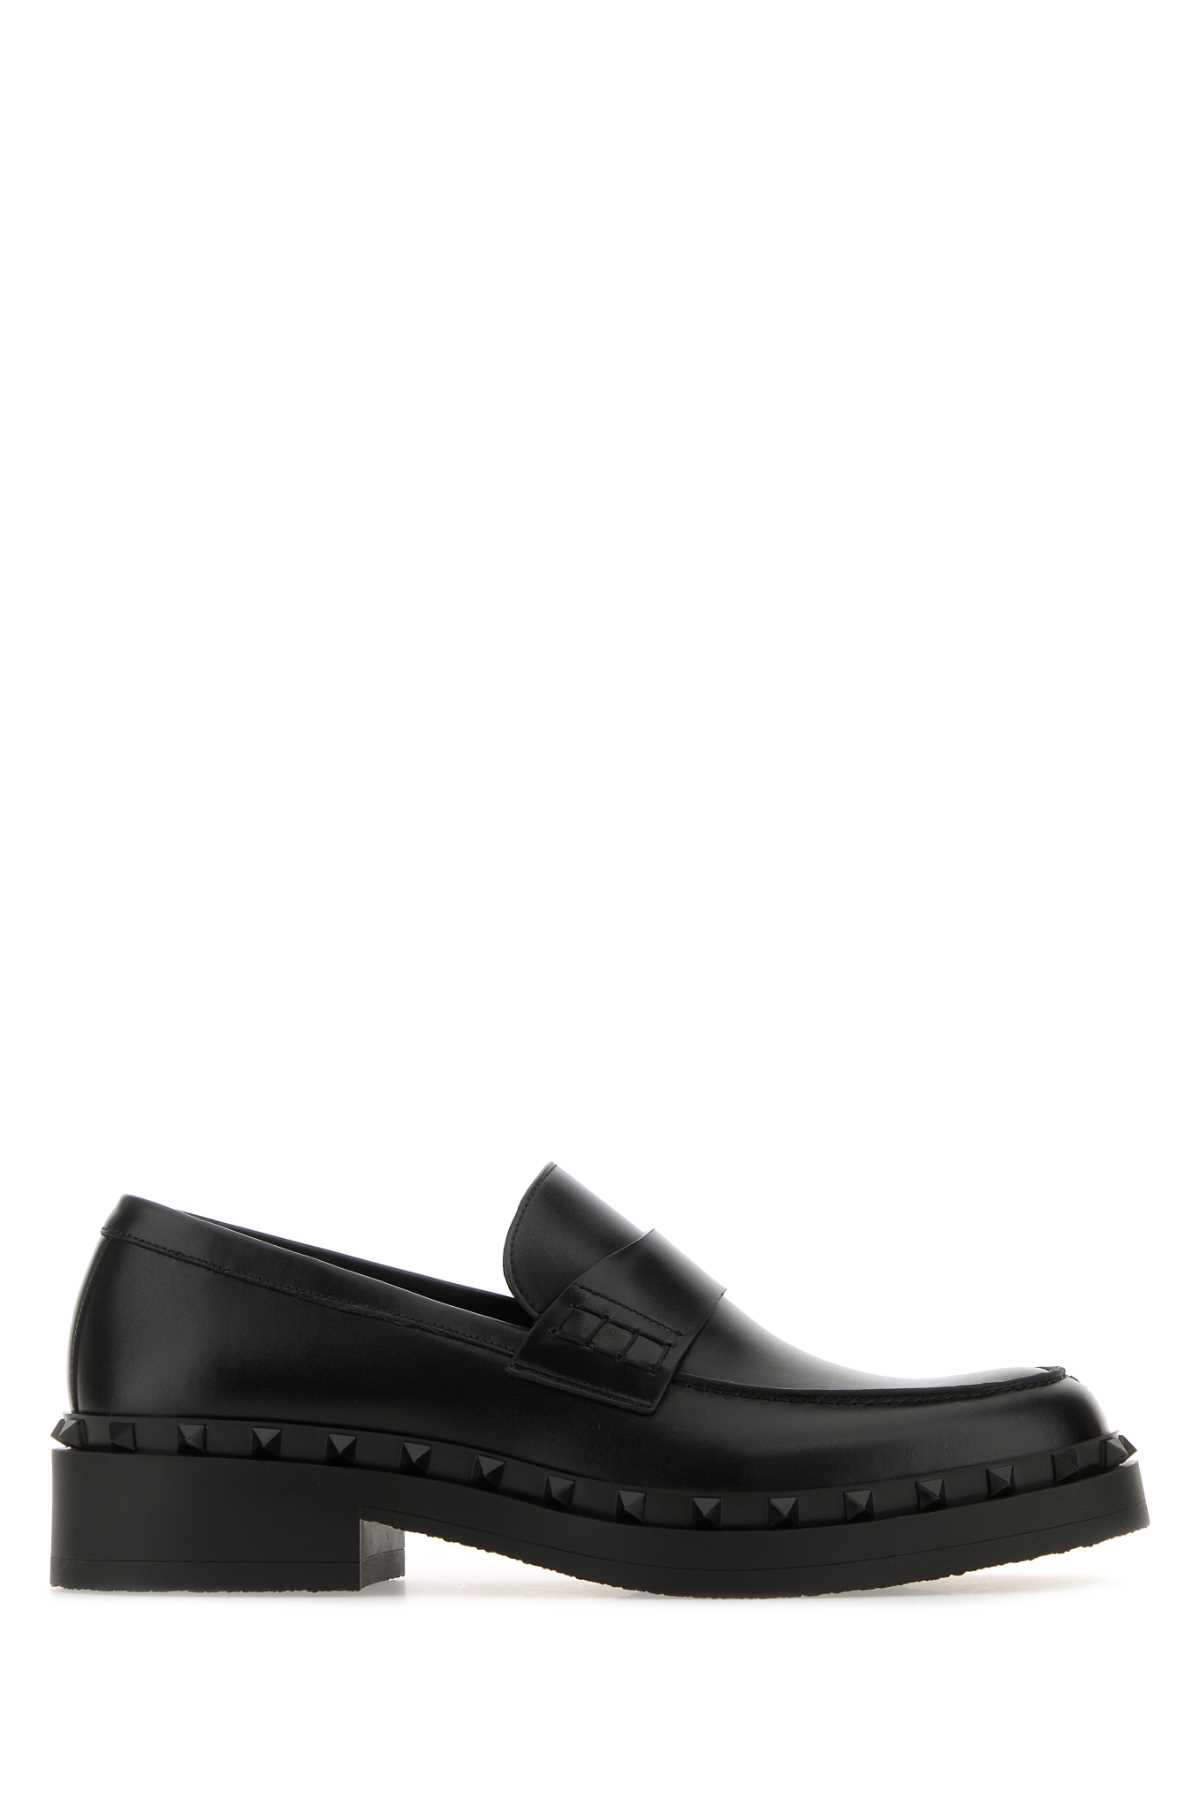 Shop Valentino Black Leather Rockstud Loafers In Nero